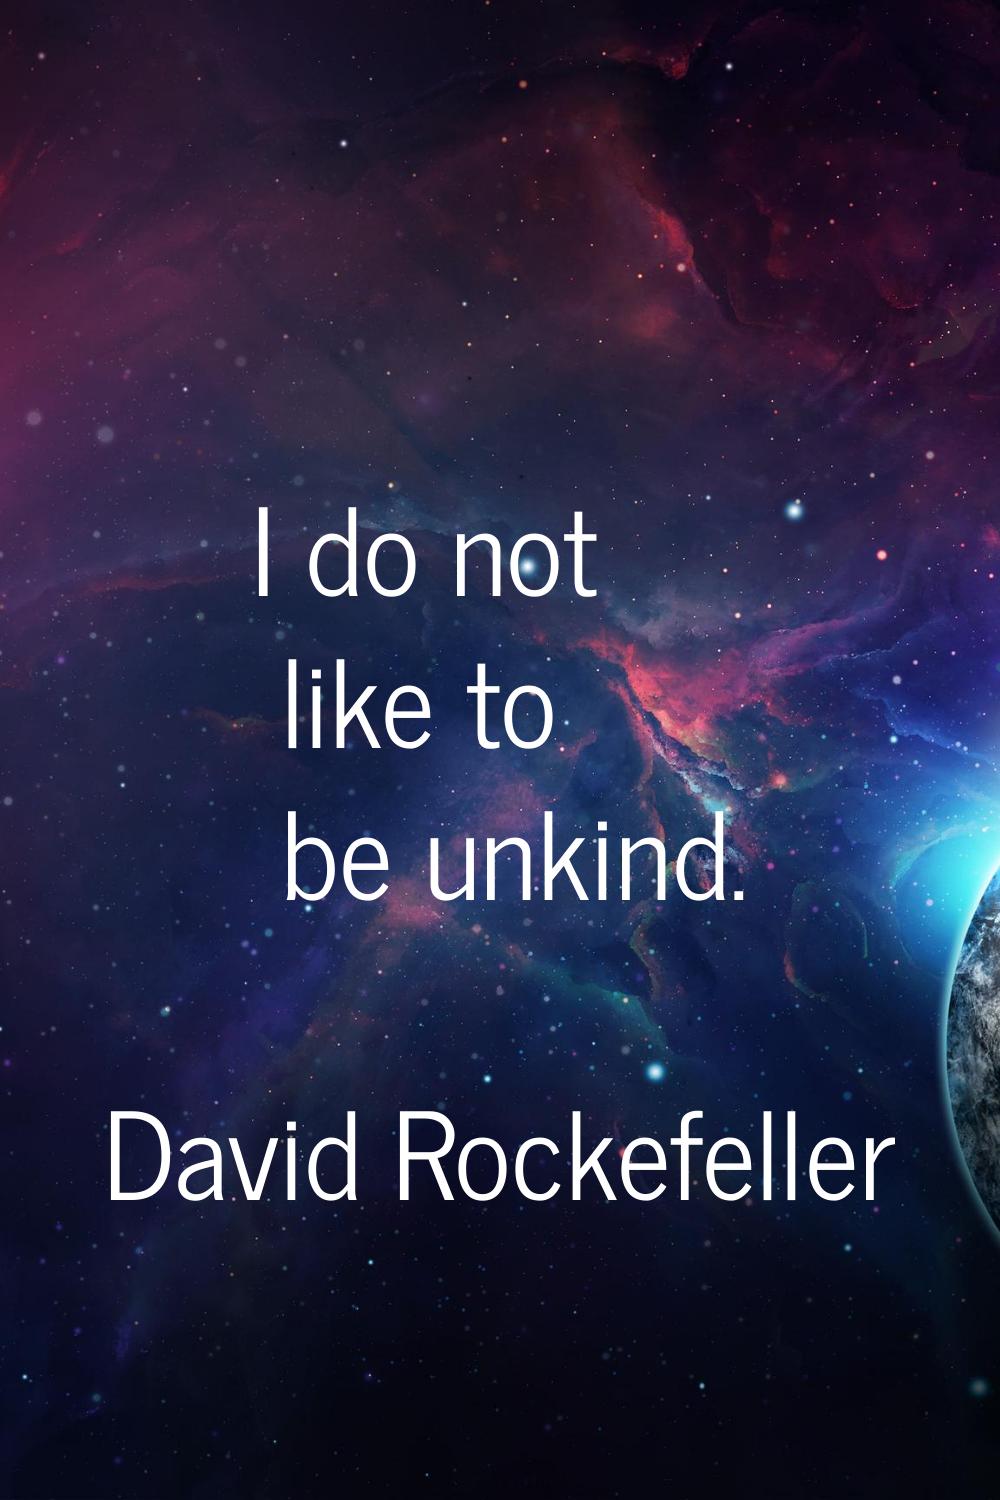 I do not like to be unkind.